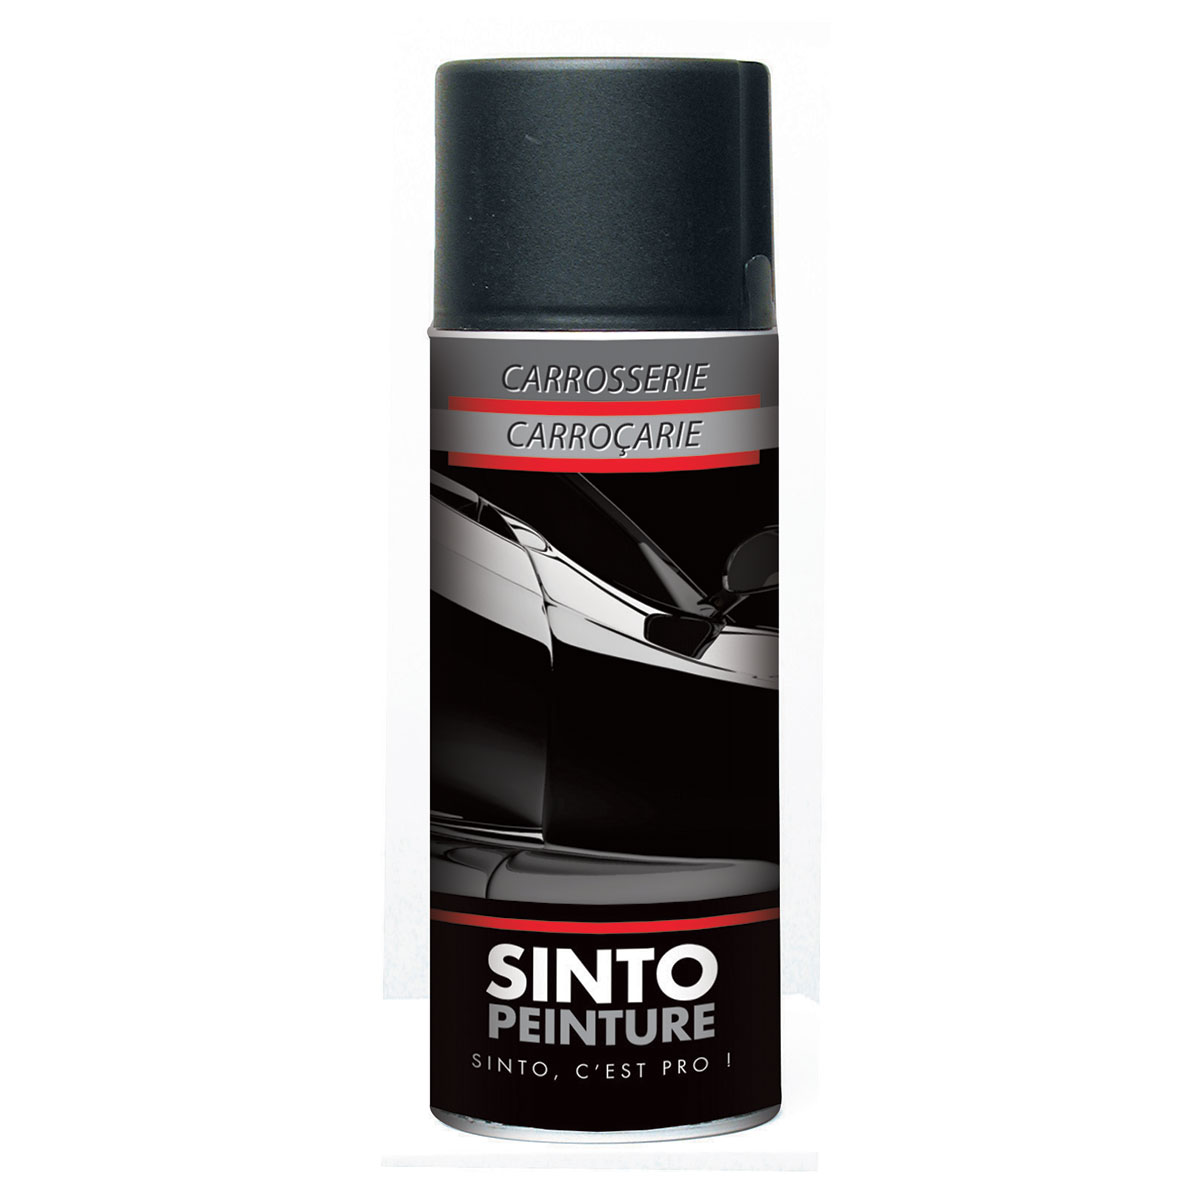 SINTO JOINT MOTEUR OR